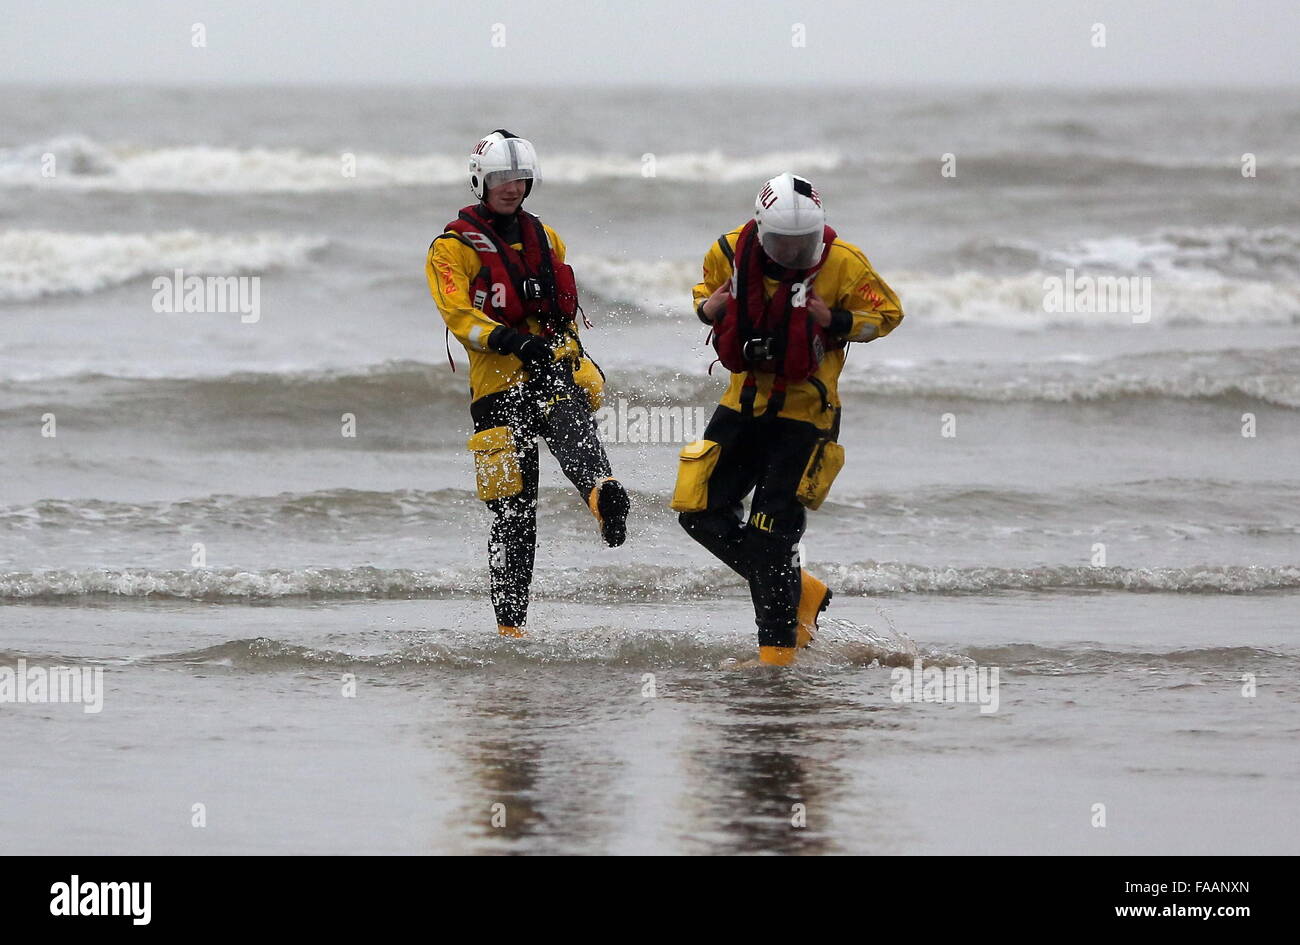 Porthcawl, UK. Friday 25 December 2015  RNLI crew members splashing each other in the seaRe: Hundreds of people in fancy dress, have taken part in this year's Christmas Swim in Porthcawl, south Wales. Credit:  D Legakis/Alamy Live News Stock Photo